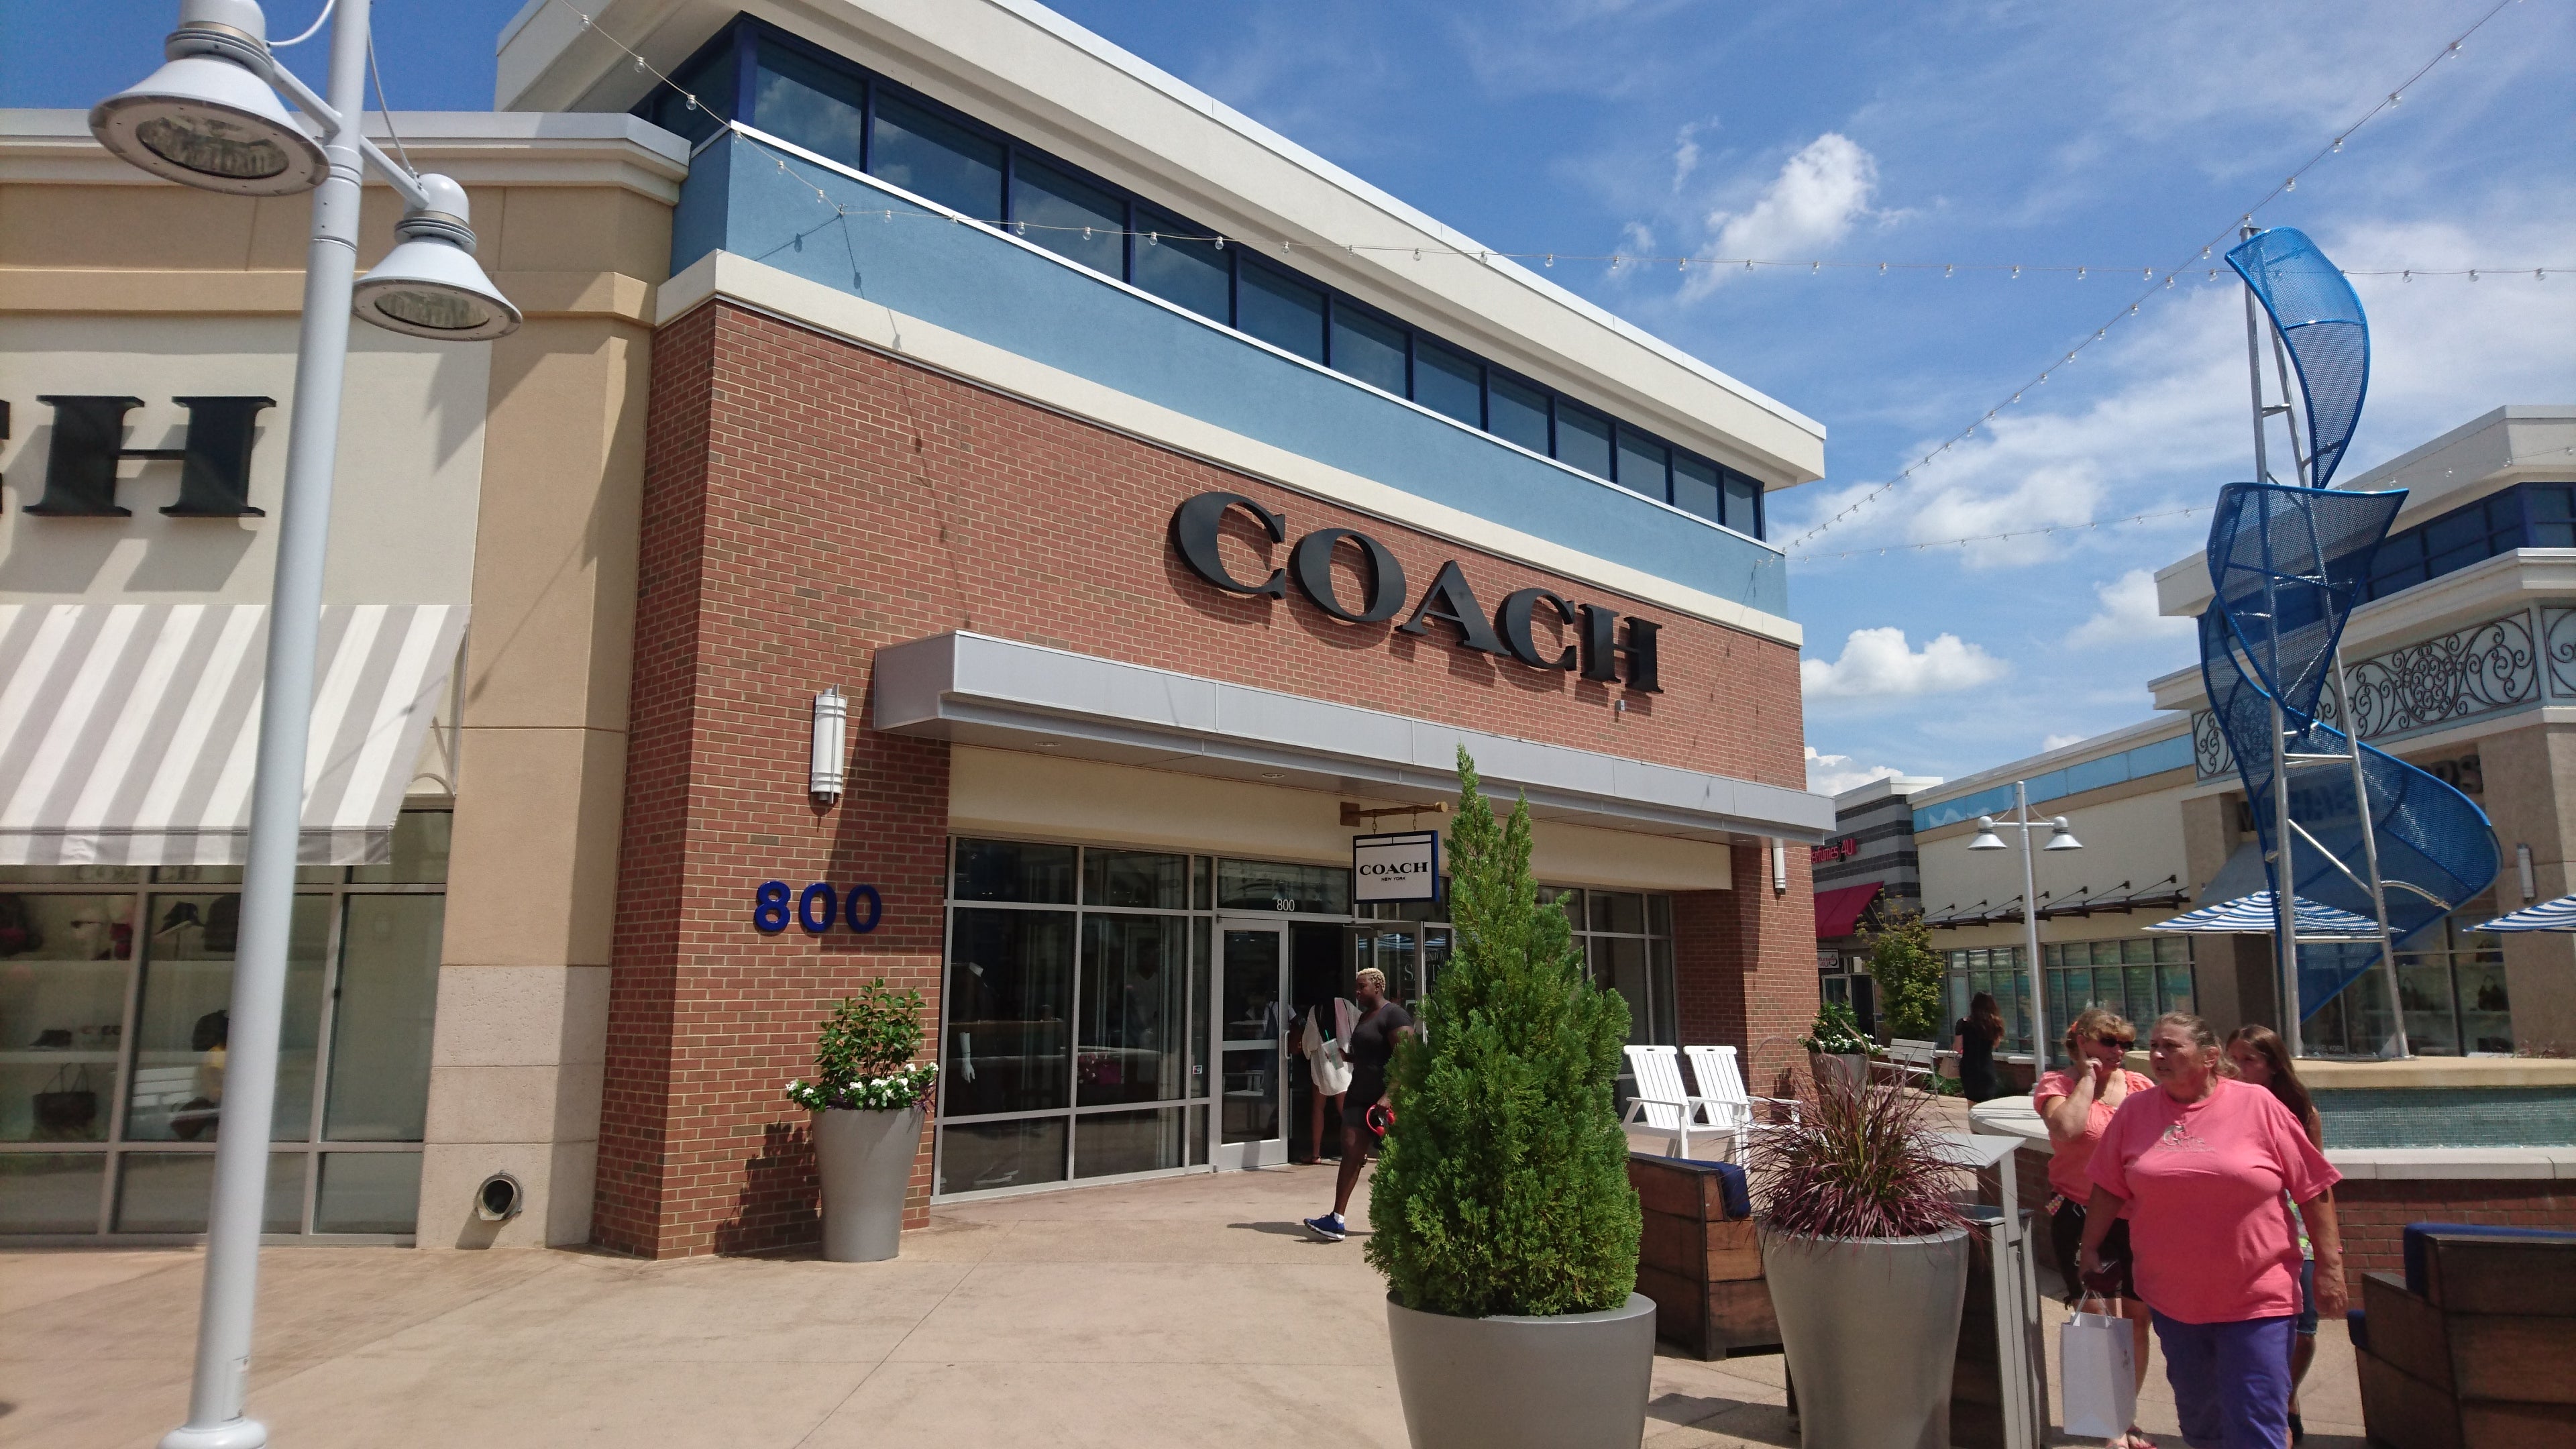 COACH Outlet, 6800 Oxon Hill Rd., Space 800, Oxon Hill, MD, Handbags -  MapQuest